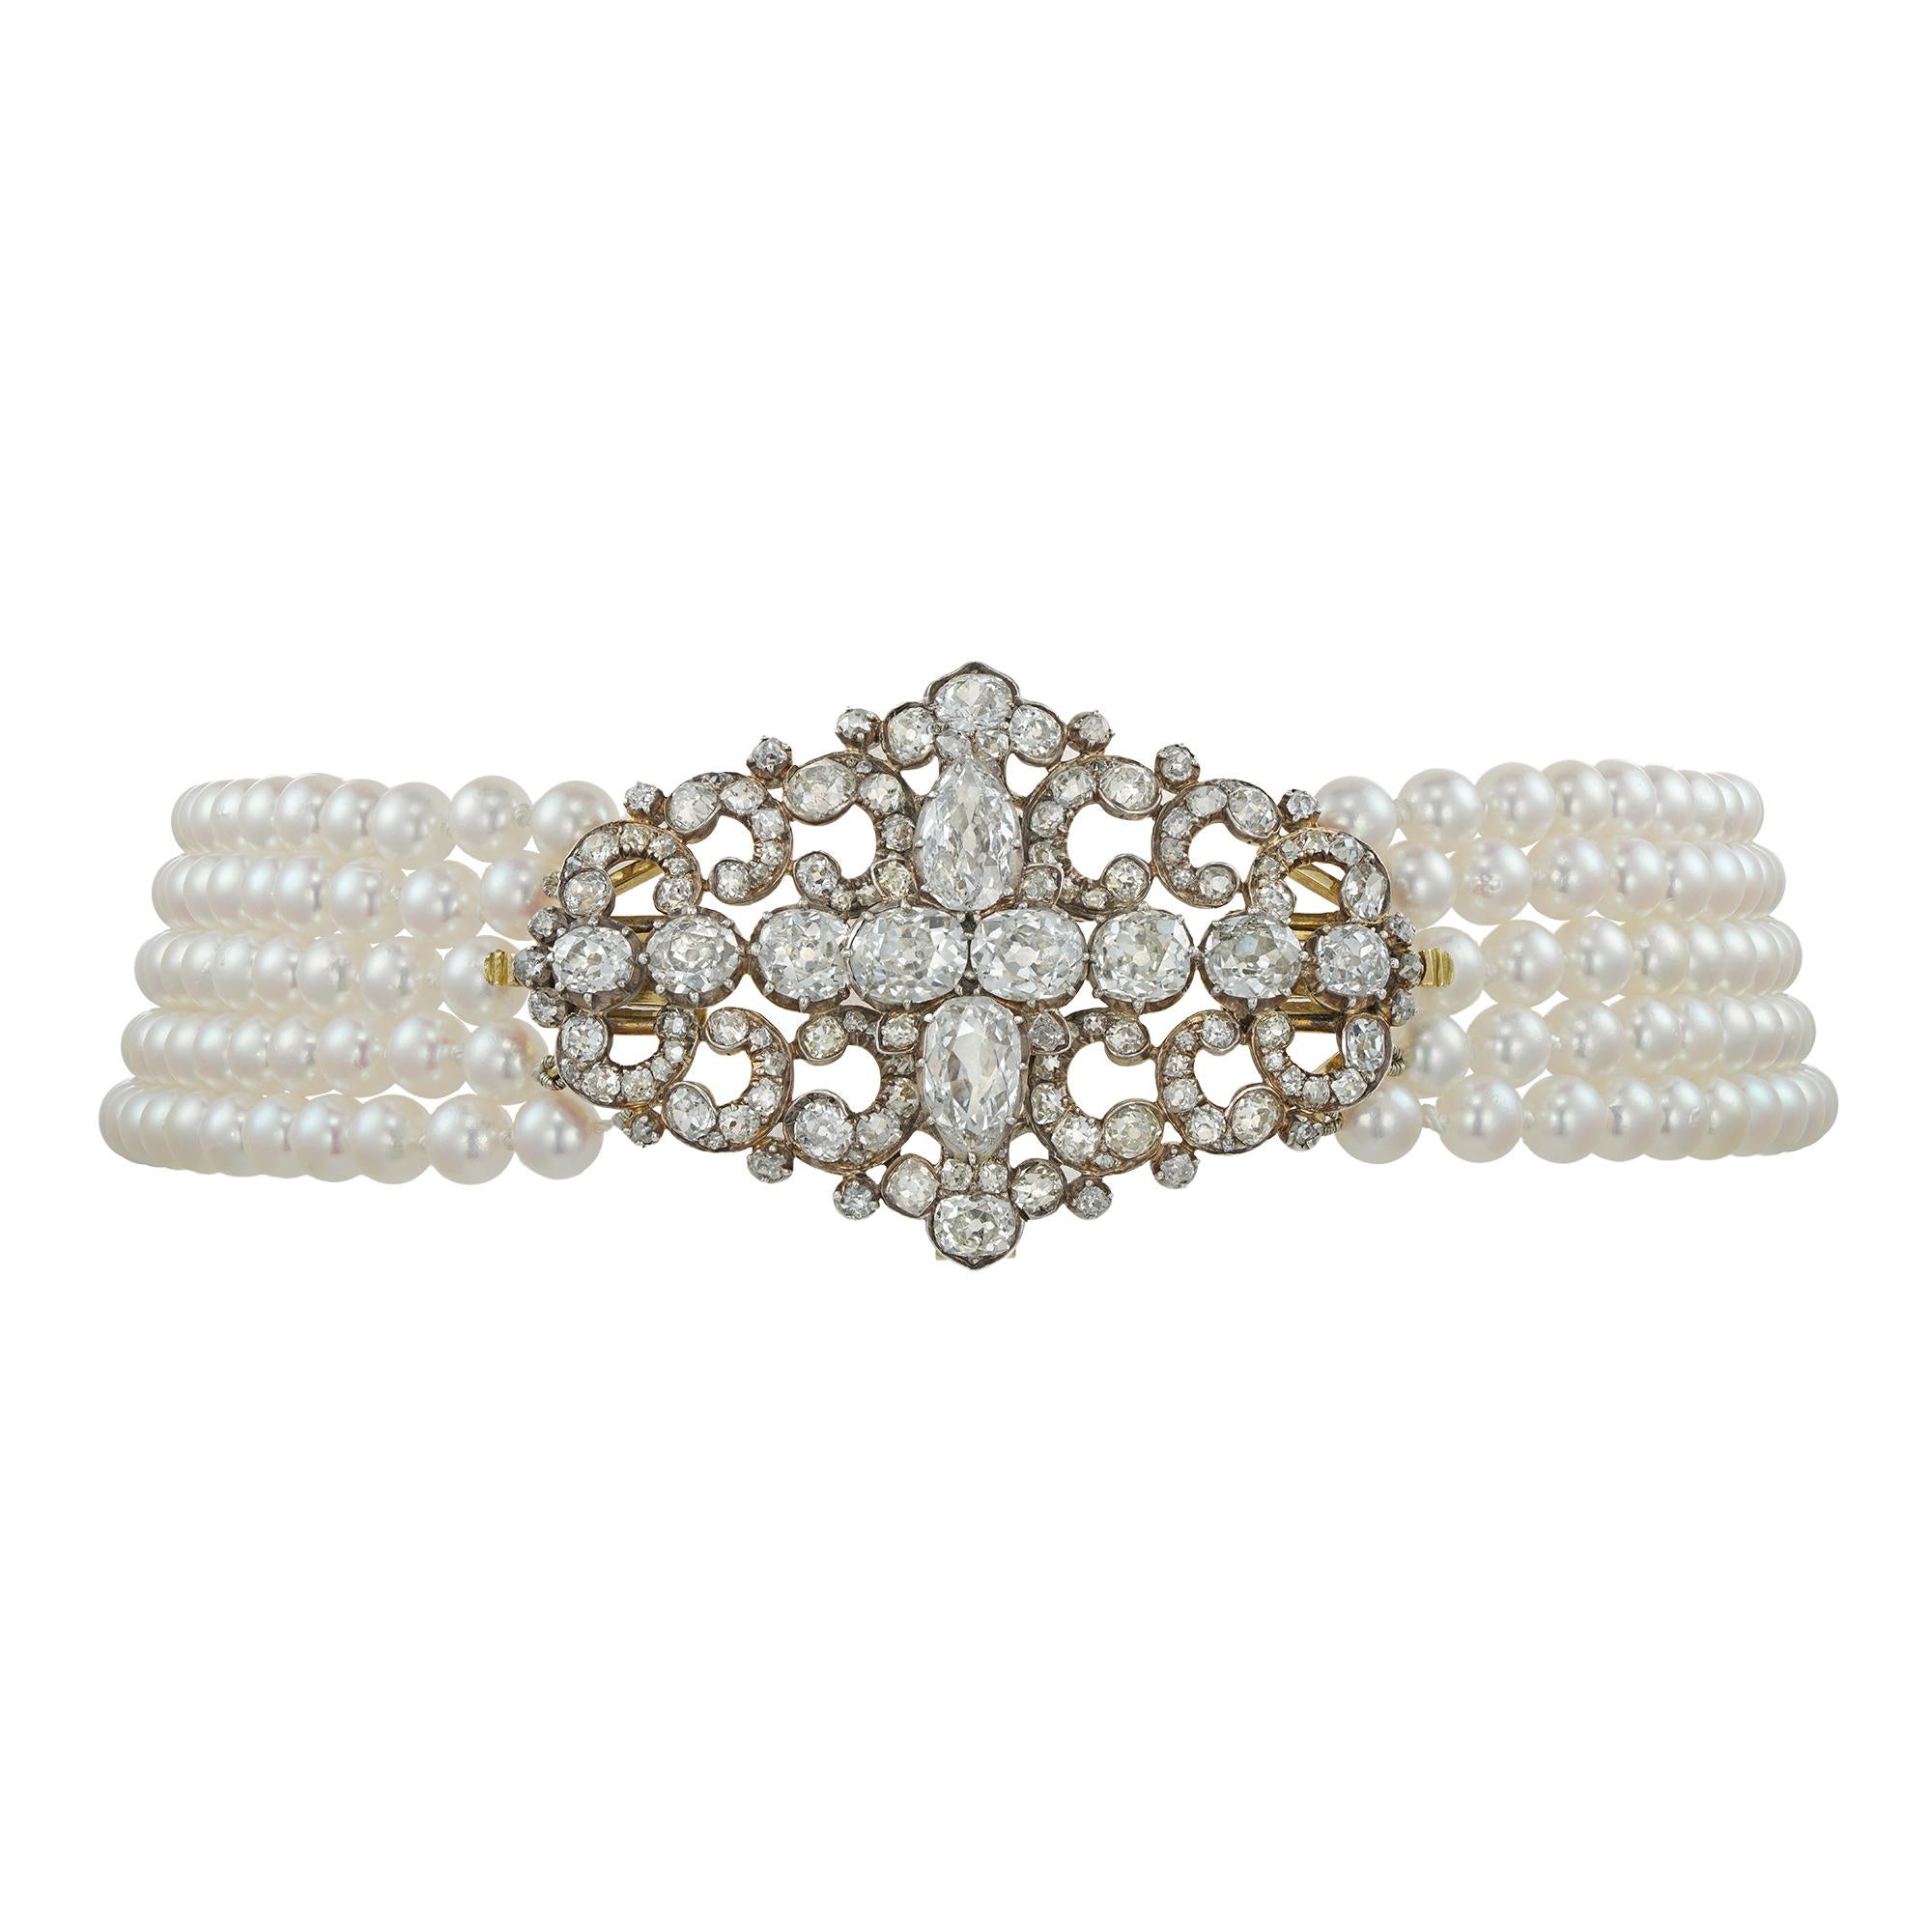 A fine Victorian diamond scroll brooch strung here as a centrepiece on a cultured pearl choker necklace, centrally-set set with a row of graduating old European-cut diamonds and two old pear-shape-cut diamonds set vertically, all within an openwork